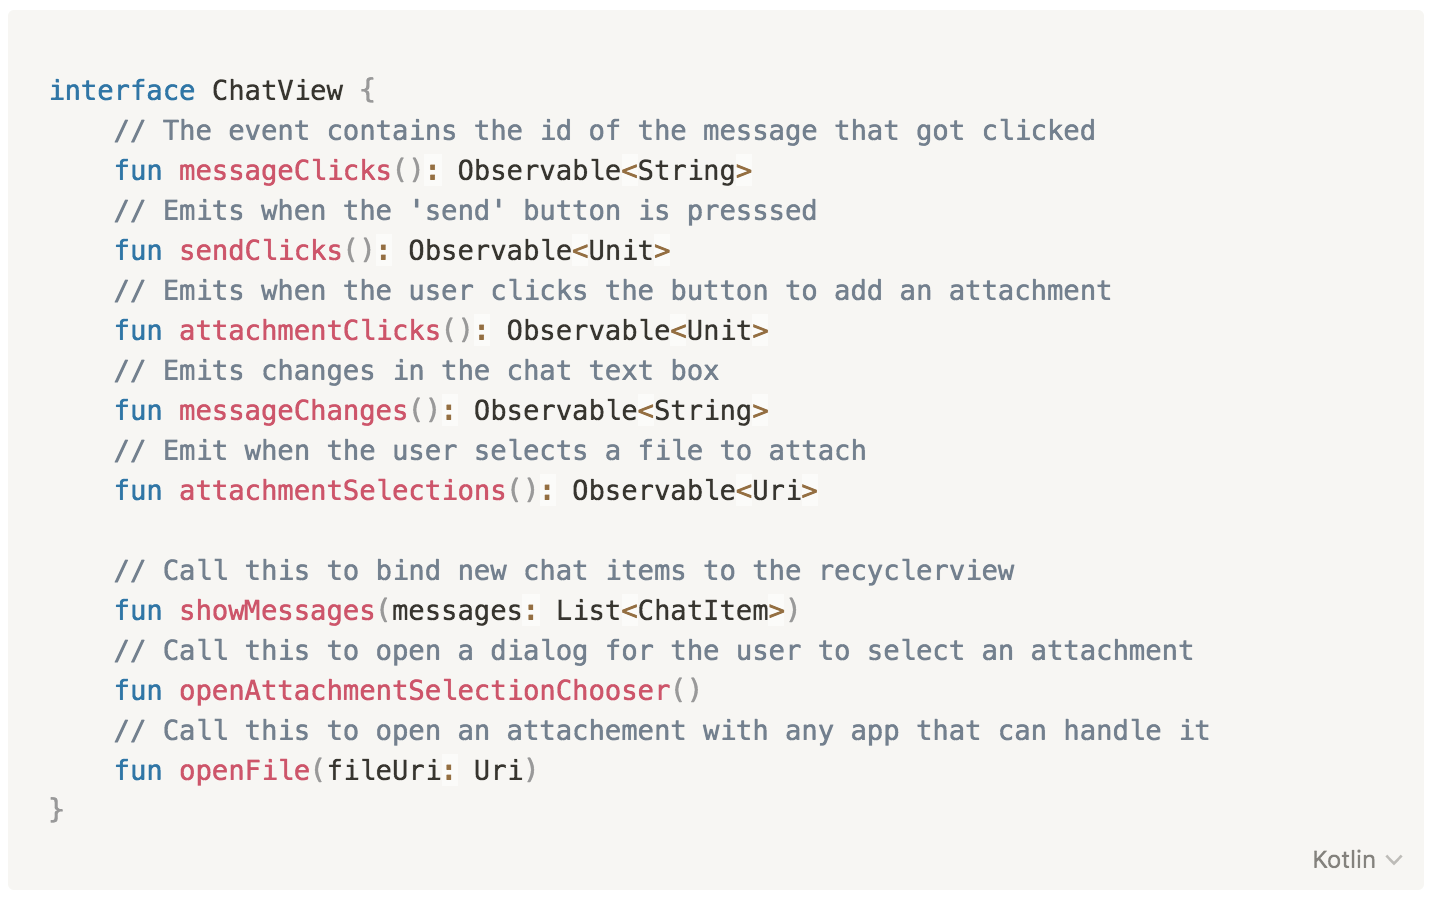 interface ChatView {
      // The event contains the id of the message that got clicked
      fun messageClicks(): Observable<String>
      // Emits when the 'send' button is presssed    
      fun sendClicks(): Observable<Unit>
      // Emits when the user clicks the button to add an attachment            
      fun attachmentClicks(): Observable<Unit>
      // Emits changes in the chat text box    
      fun messageChanges(): Observable<String>
      // Emit when the user selects a file to attach    
      fun attachmentSelections(): Observable<Uri>    
      
      // Call this to bind new chat items to the recyclerview
      fun showMessages(messages: List<ChatItem>)    
      // Call this to open a dialog for the user to select an attachment
      fun openAttachmentSelectionChooser()
      // Call this to open an attachement with any app that can handle it        
      fun openFile(fileUri: Uri)                    
    }